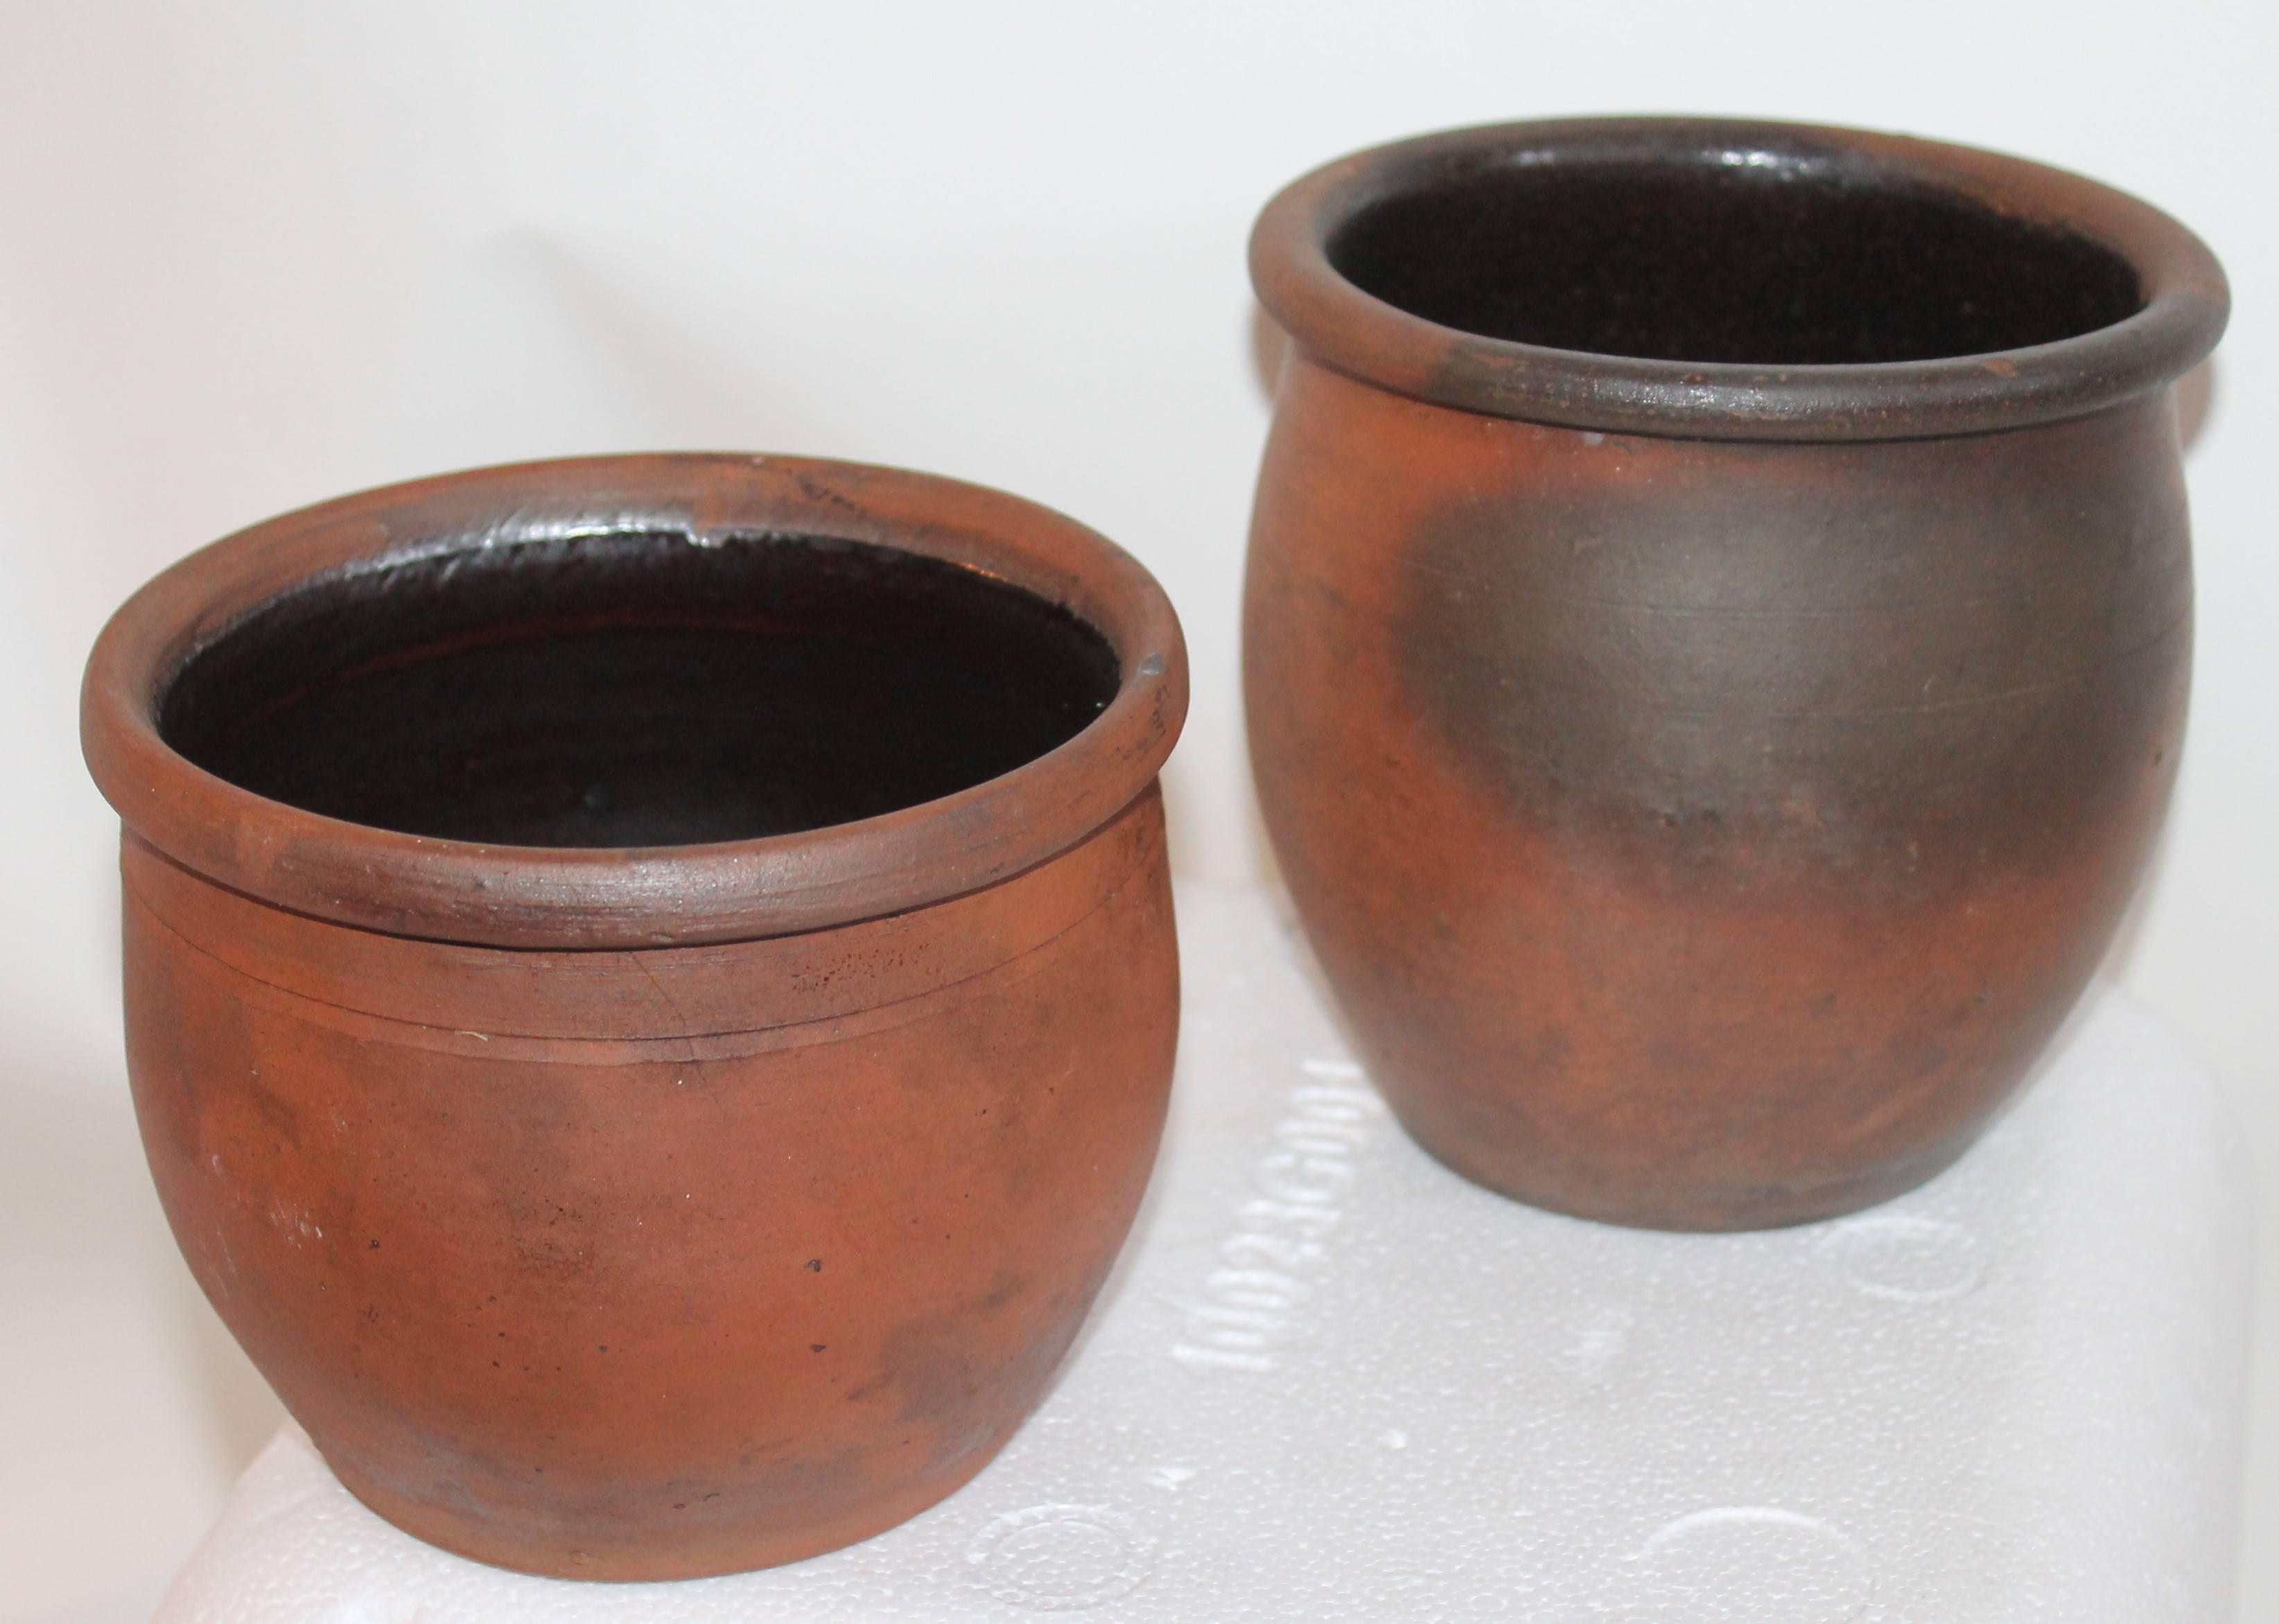 Small crock is 6 inch in diameter x 4.5 inches high
Larger crock is 5.5 inches x 5.5 inches
Both in good condition.